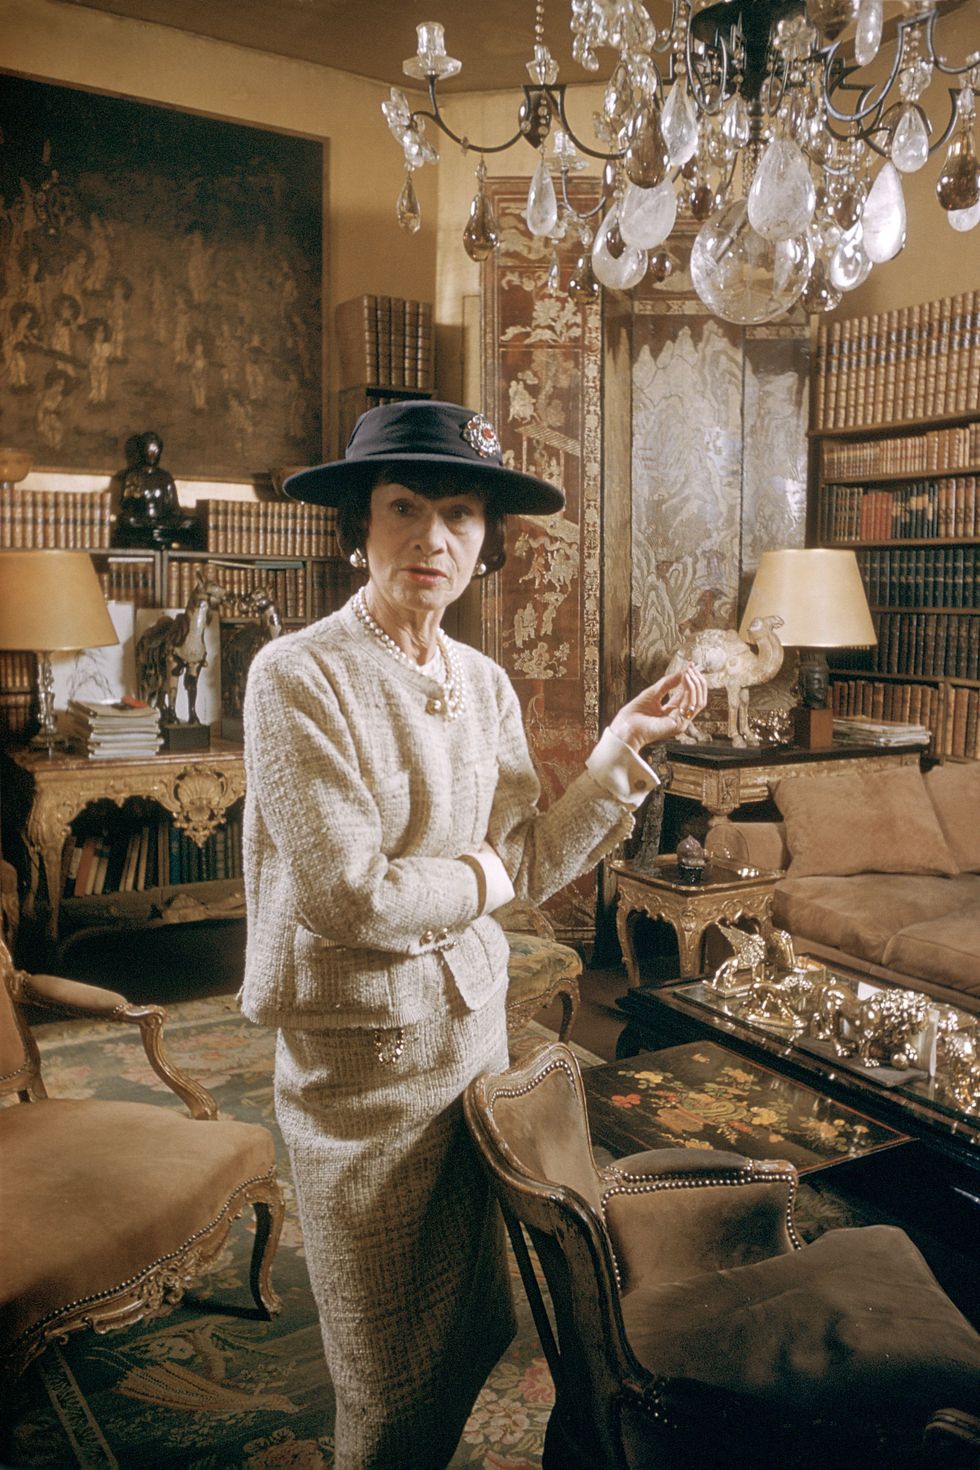 A new film explores Gabrielle Chanel's relationship with literature